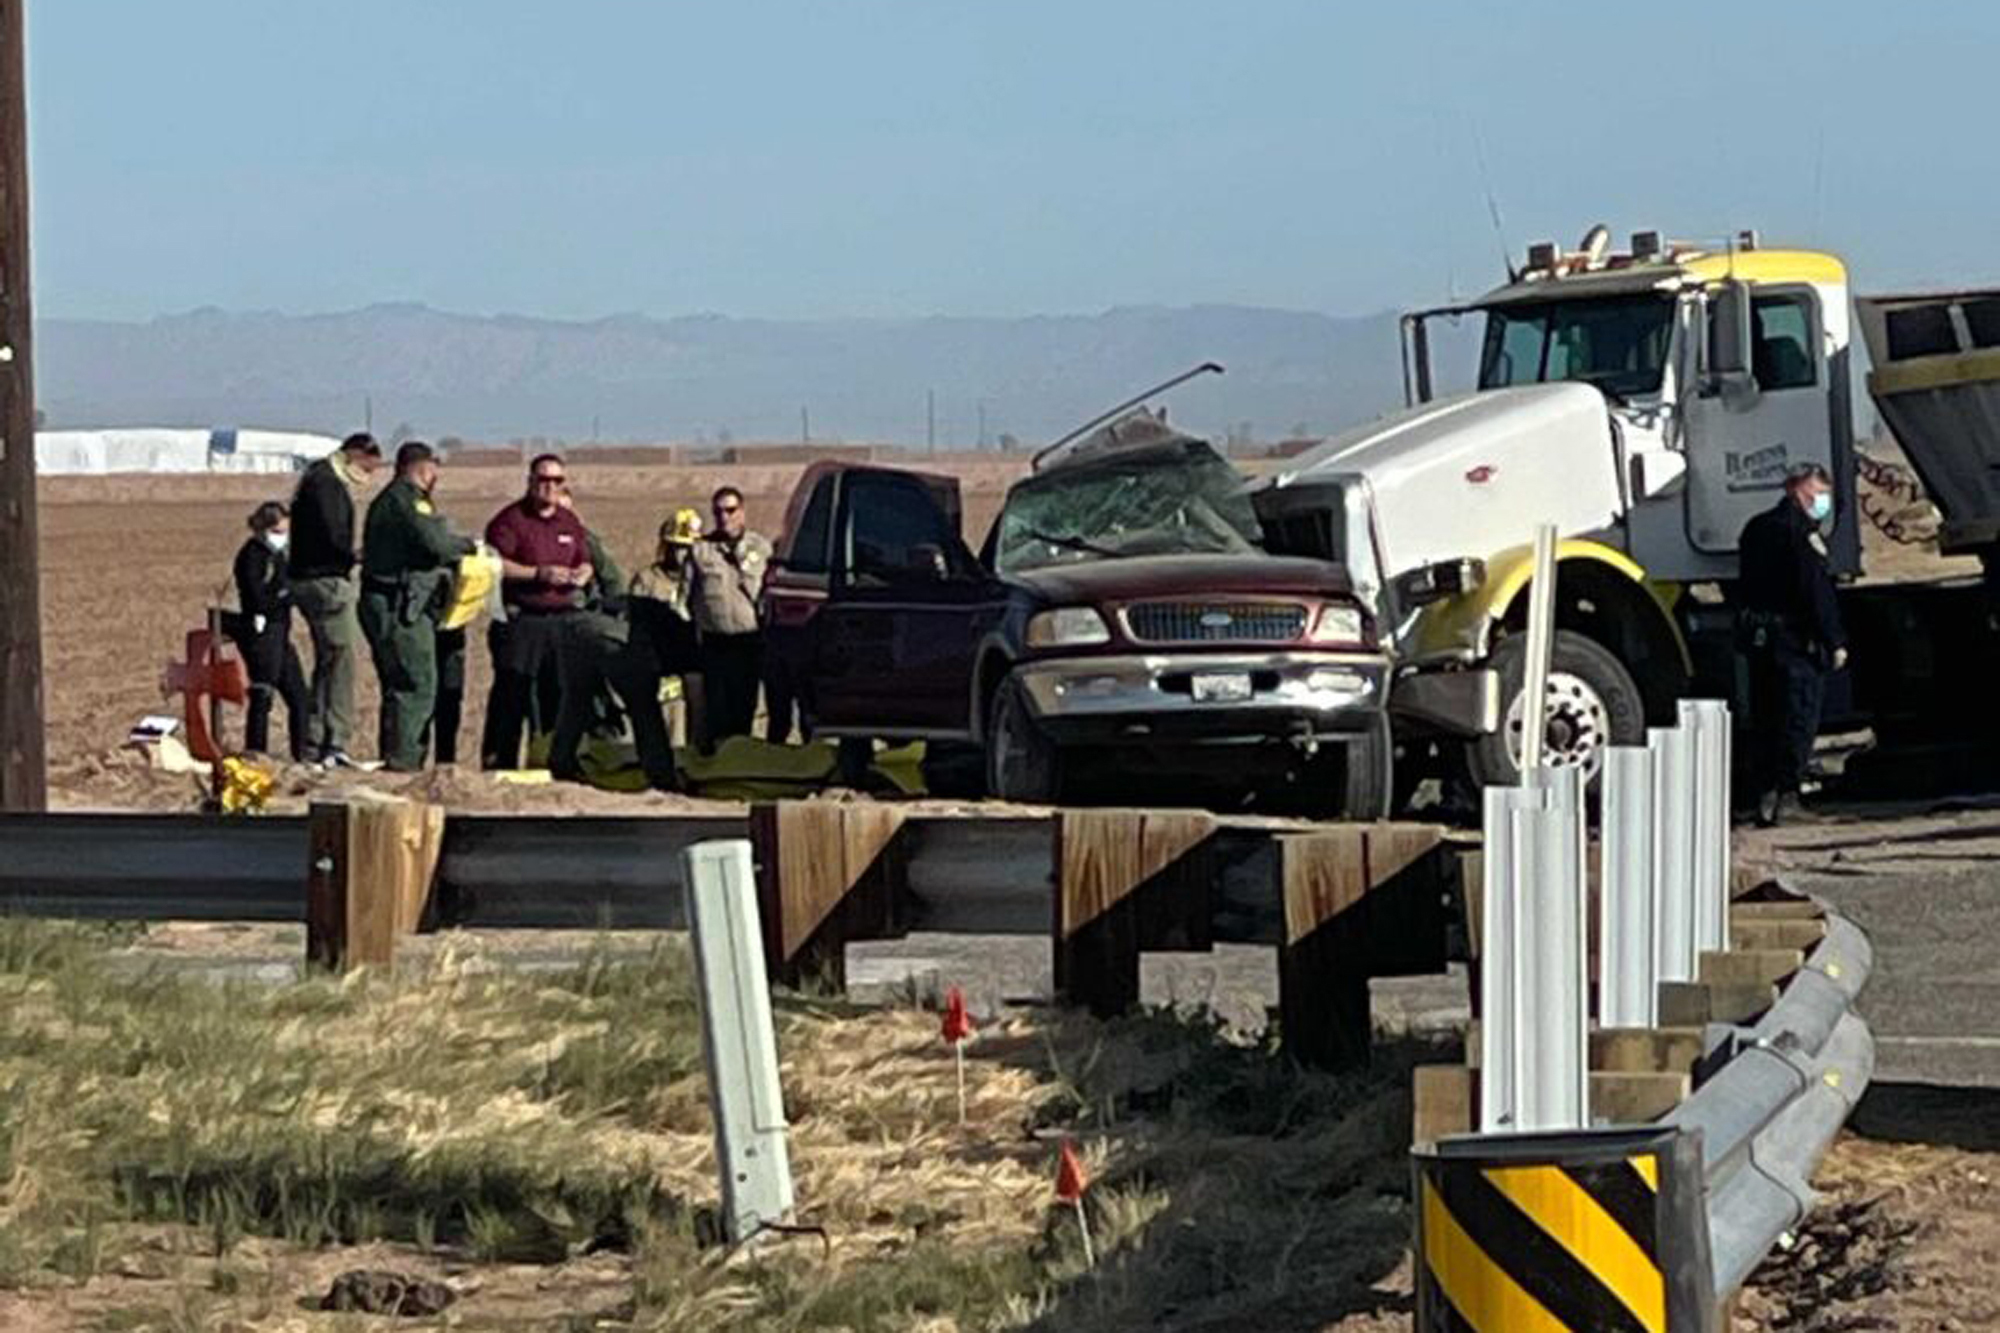 PHOTO: In this image from KYMA, law enforcement work at the scene of a deadly crash involving a semi-truck and an SUV in Holtville, Calif., March 2, 2021.